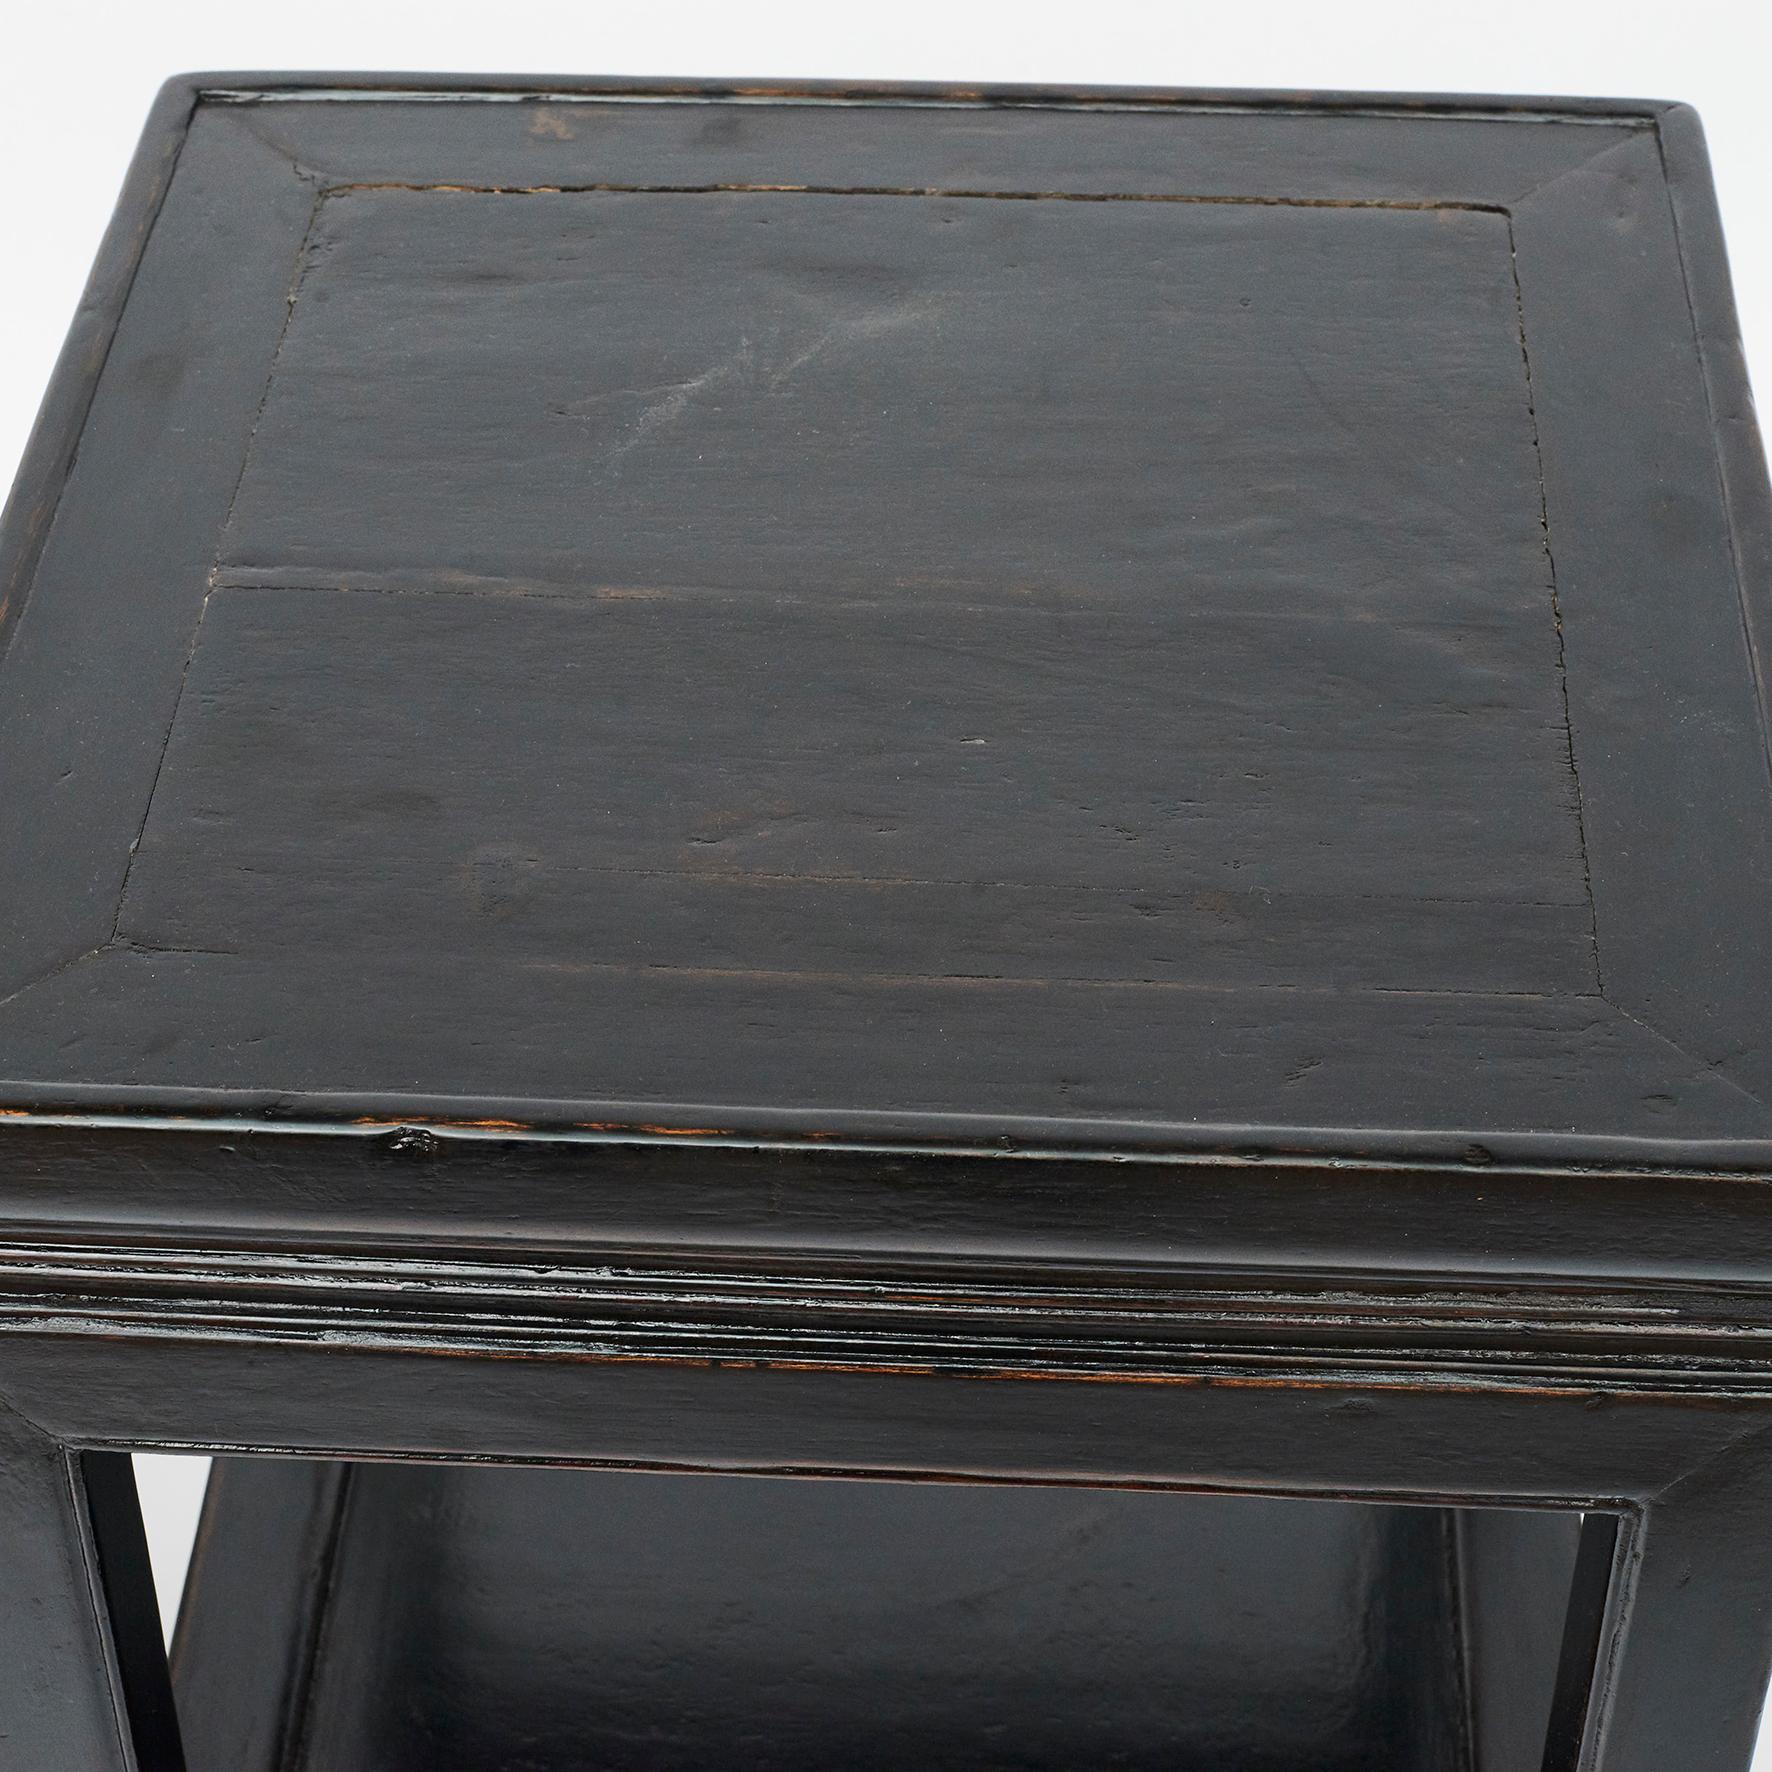 Art Deco Pair of Square Black Lacquer End or Side Tables with Shelves, Beijing, 1910-1920